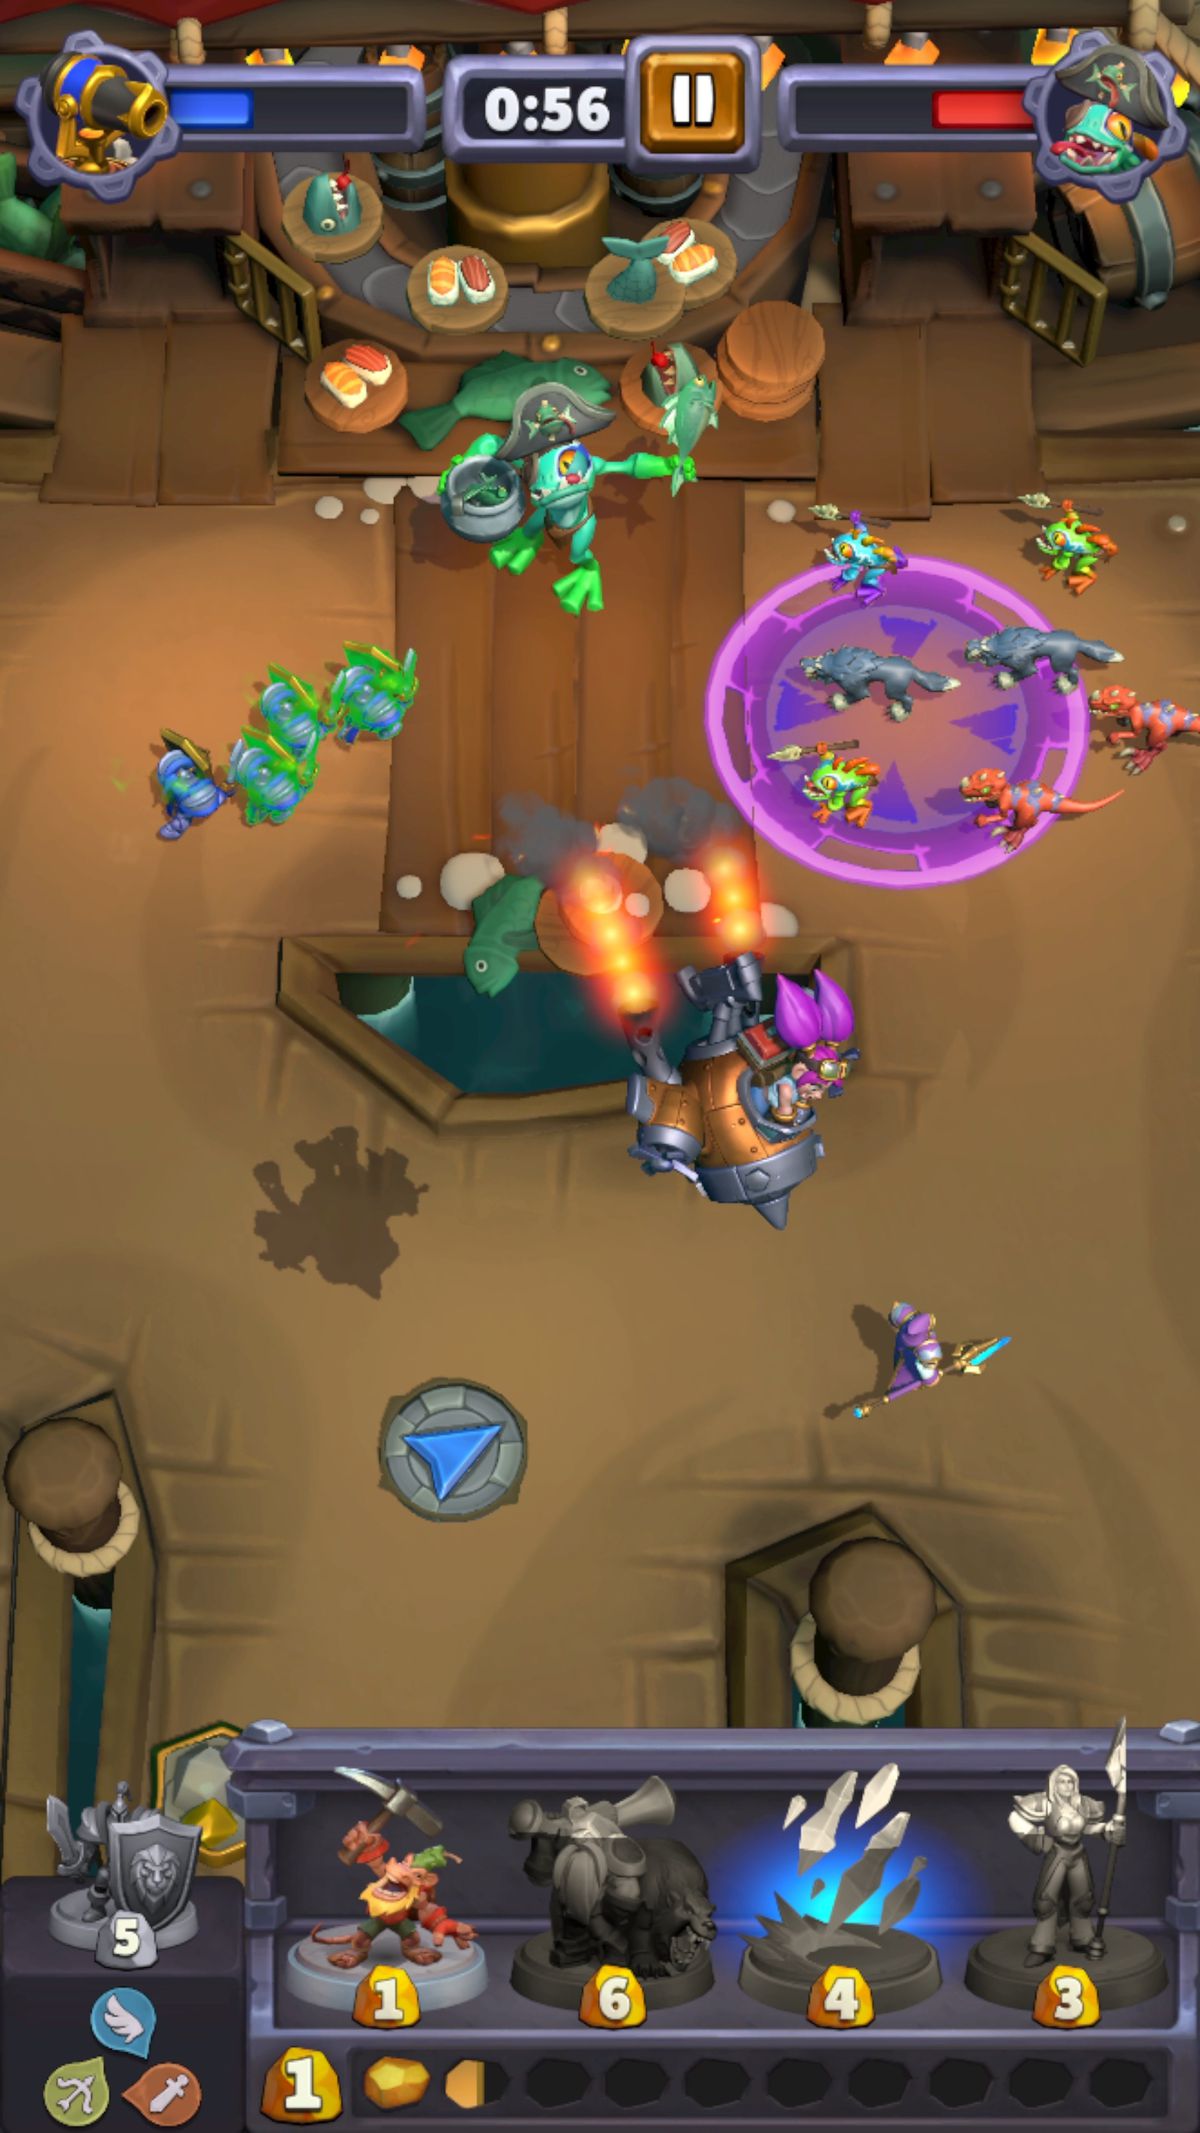 Gameplay from Warcraft Rumble, showing the player engaged in a battle using the hero Jaina Proudmoore against a sea of Murlocs.